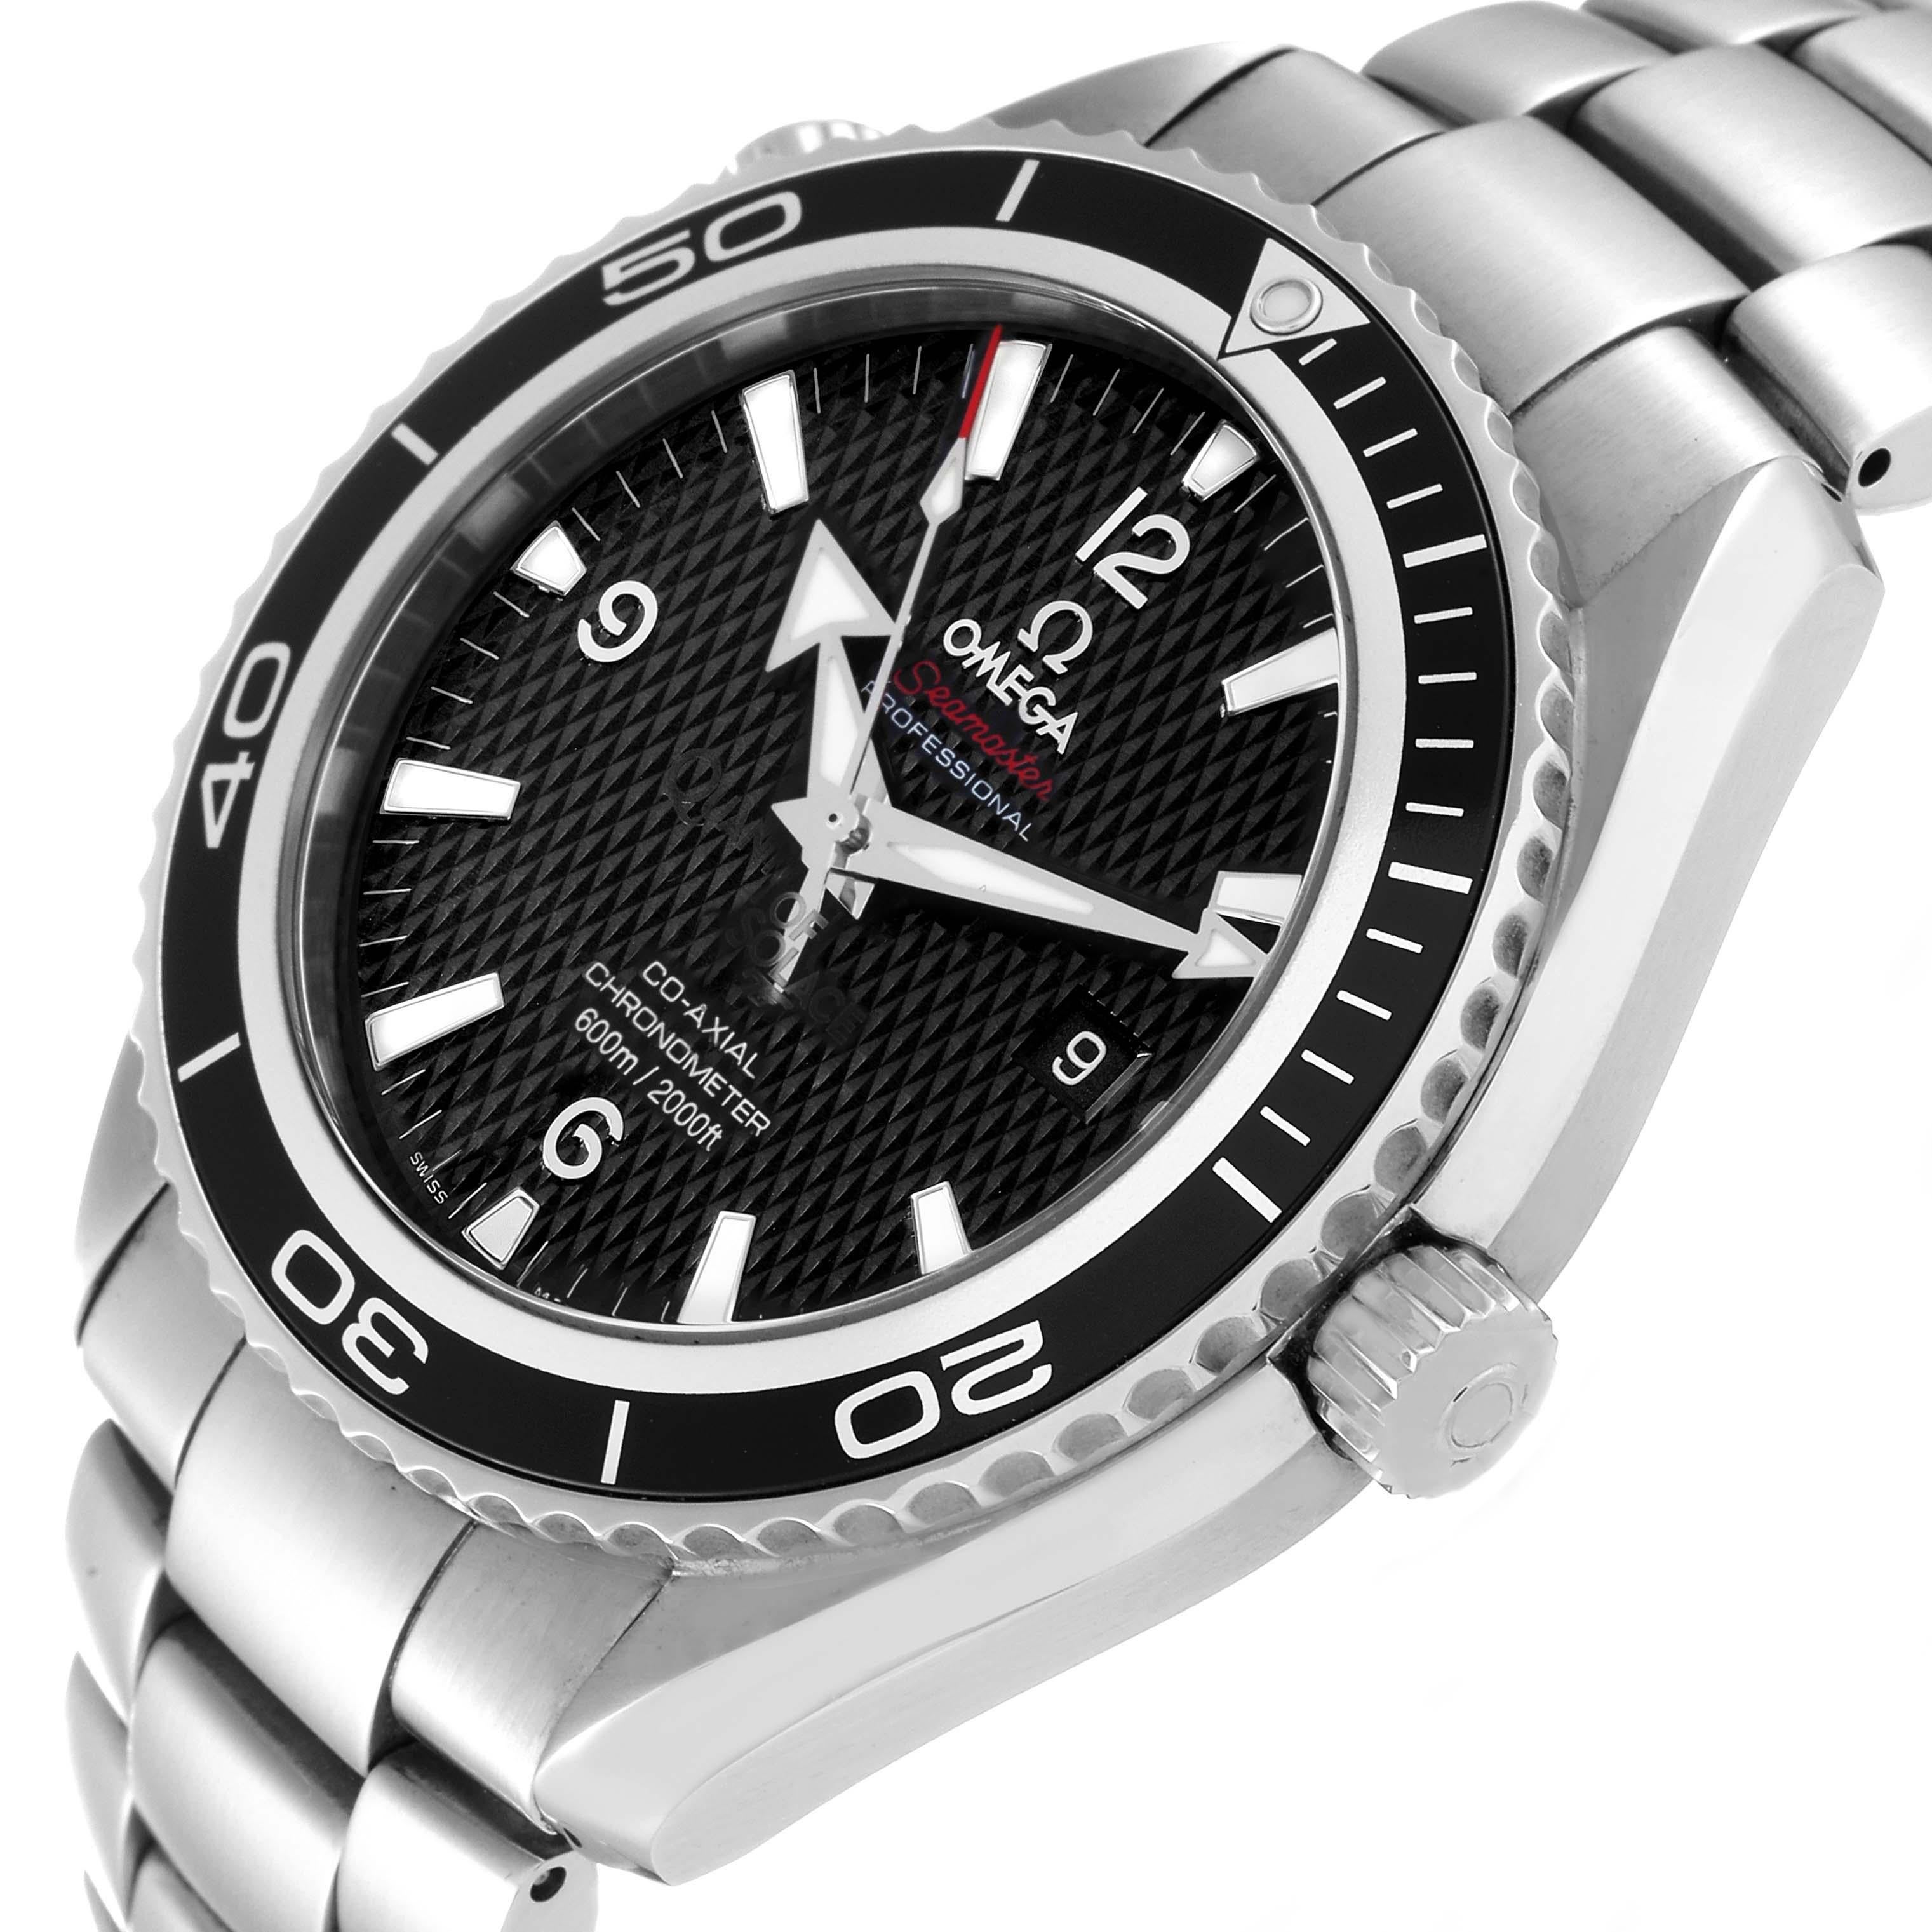 Omega Planet Ocean Quantum Solace Limited Edition Steel Mens Watch 222.30.46.20.01.001 Card. Automatic self-winding chronograph movement. Stainless steel round case 45.5 mm in diameter. Caseback is embossed with the 007 logo. Black uni-directional